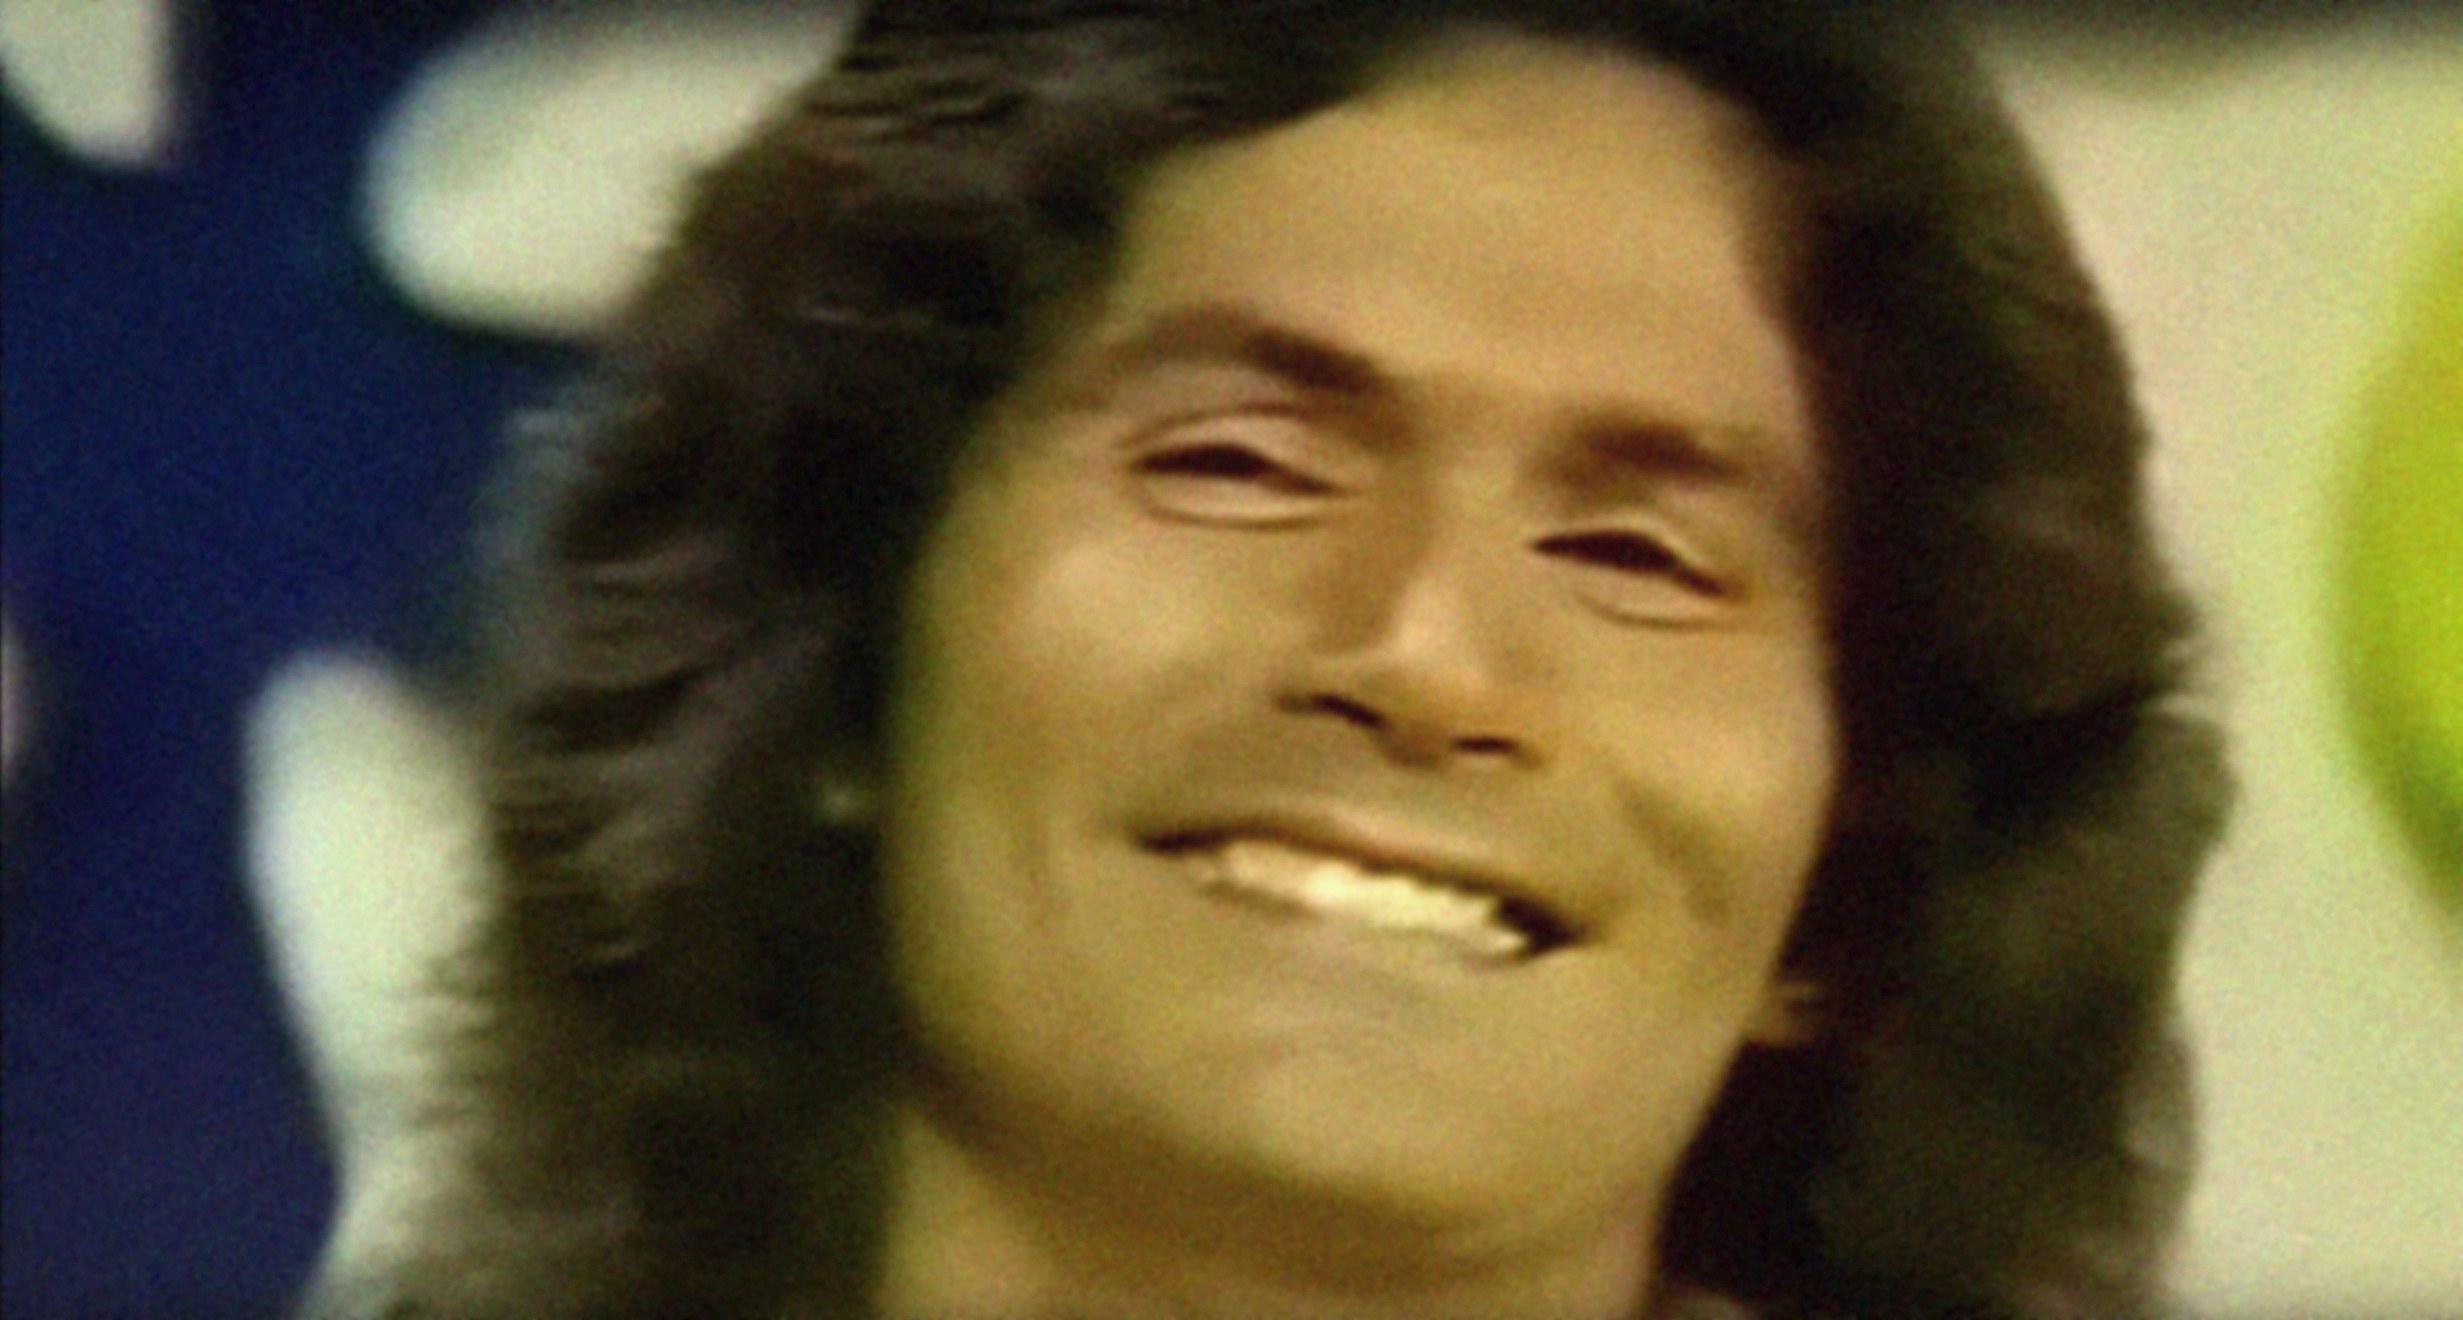 Rodney Alcala grinning after being asked a question on The Dating Game